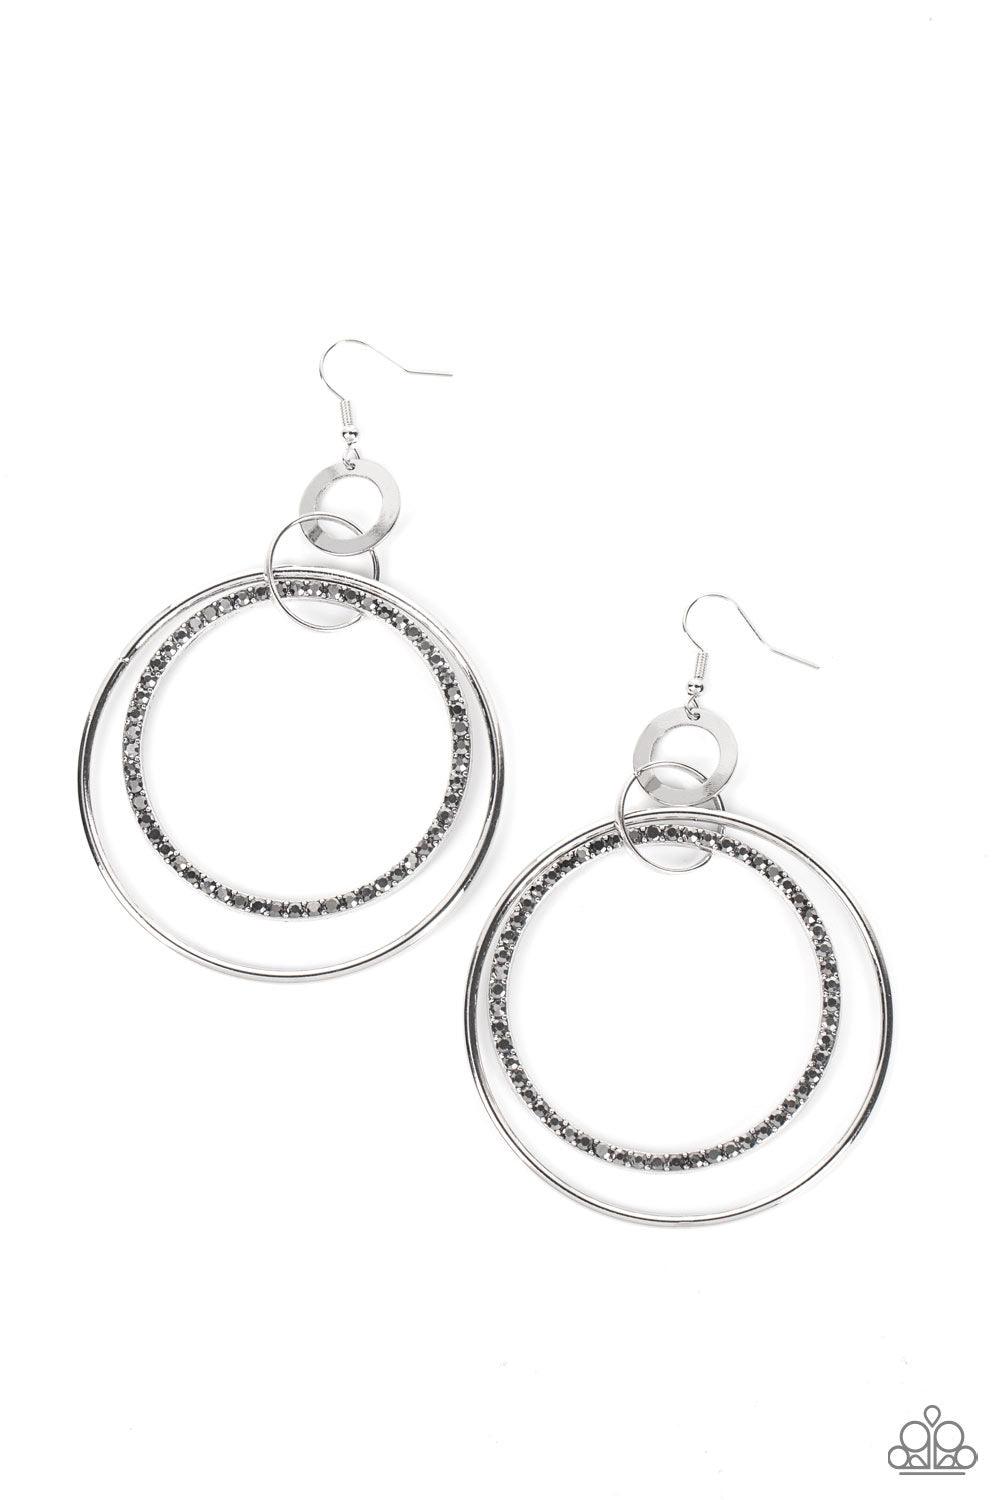 Paparazzi Accessories Haute Hysteria - Silver Summer Party Pack EXCLUSIVE earrings Jewelry